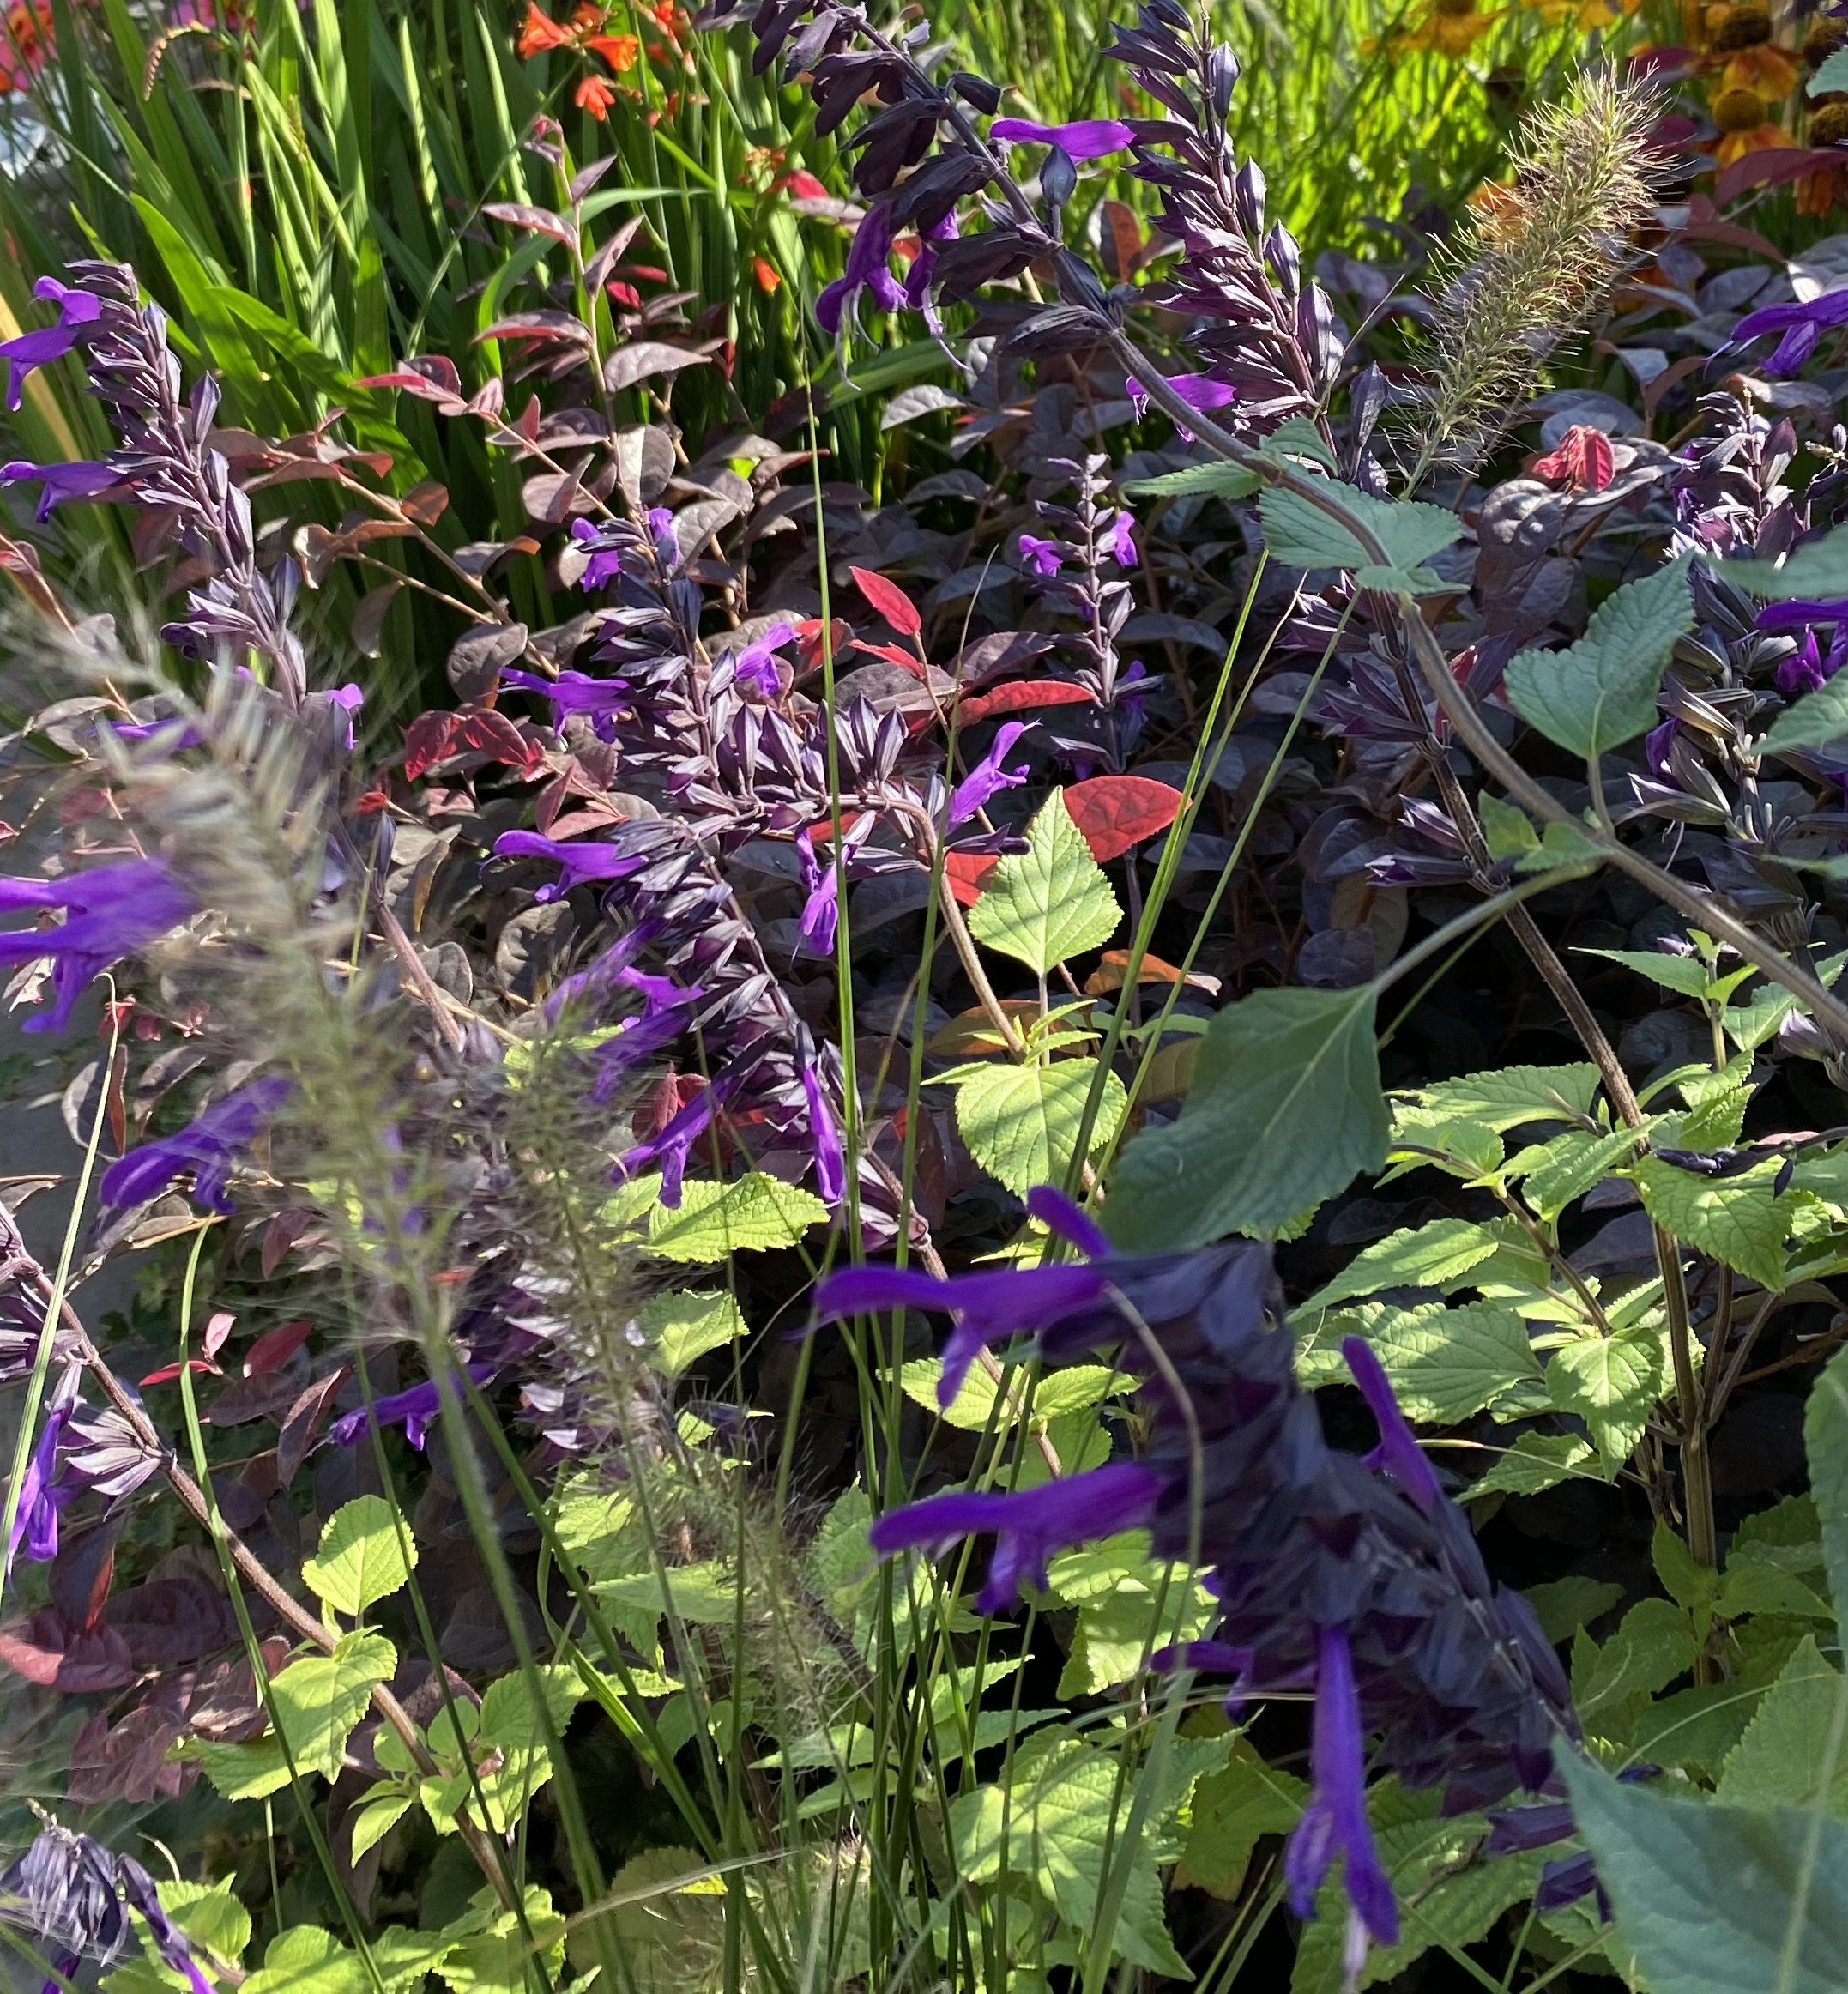 Salvia ‘Armistad’ with its bold, purple flowers is a must for any container